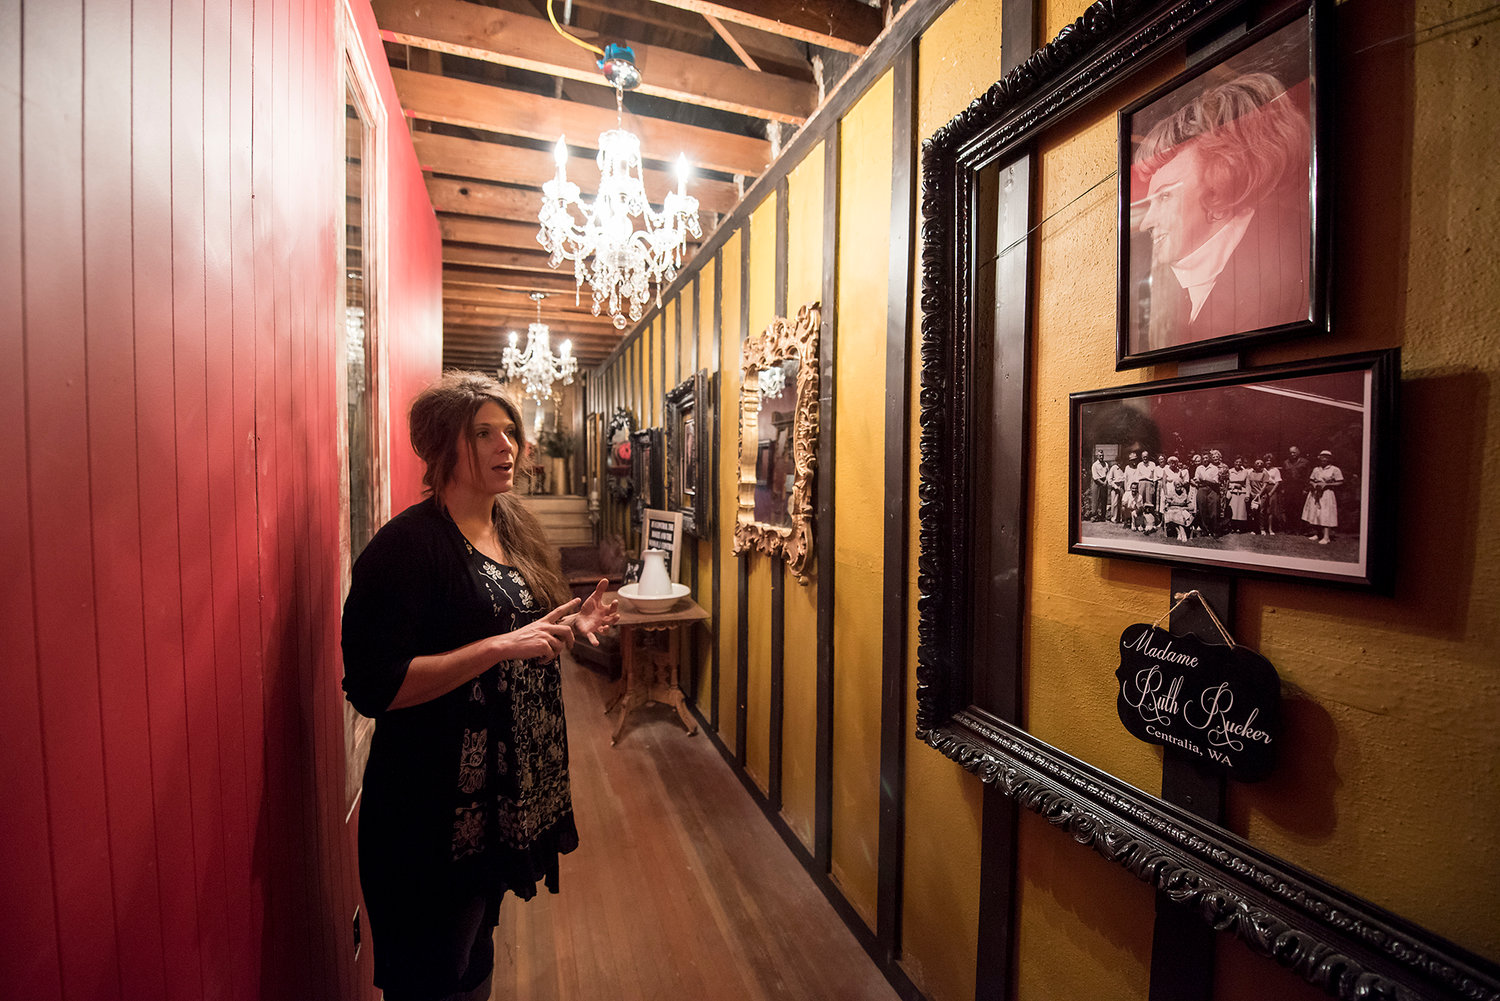 Holly Phelps, owner of the Shady Lady in downtown Centralia, stands in the narrow hallway adorned with pictures of Madame Ruth Rucker, who ran a brothel in Centralia in the early 20th century, while giving a tour of her new Bordello Museum on Wednesday afternoon. The museum, which opens on Friday, is styled after Madame Rucker's apartment and will focus on the entrepreneurship of the women who ran these brothels as businesses to support their families.